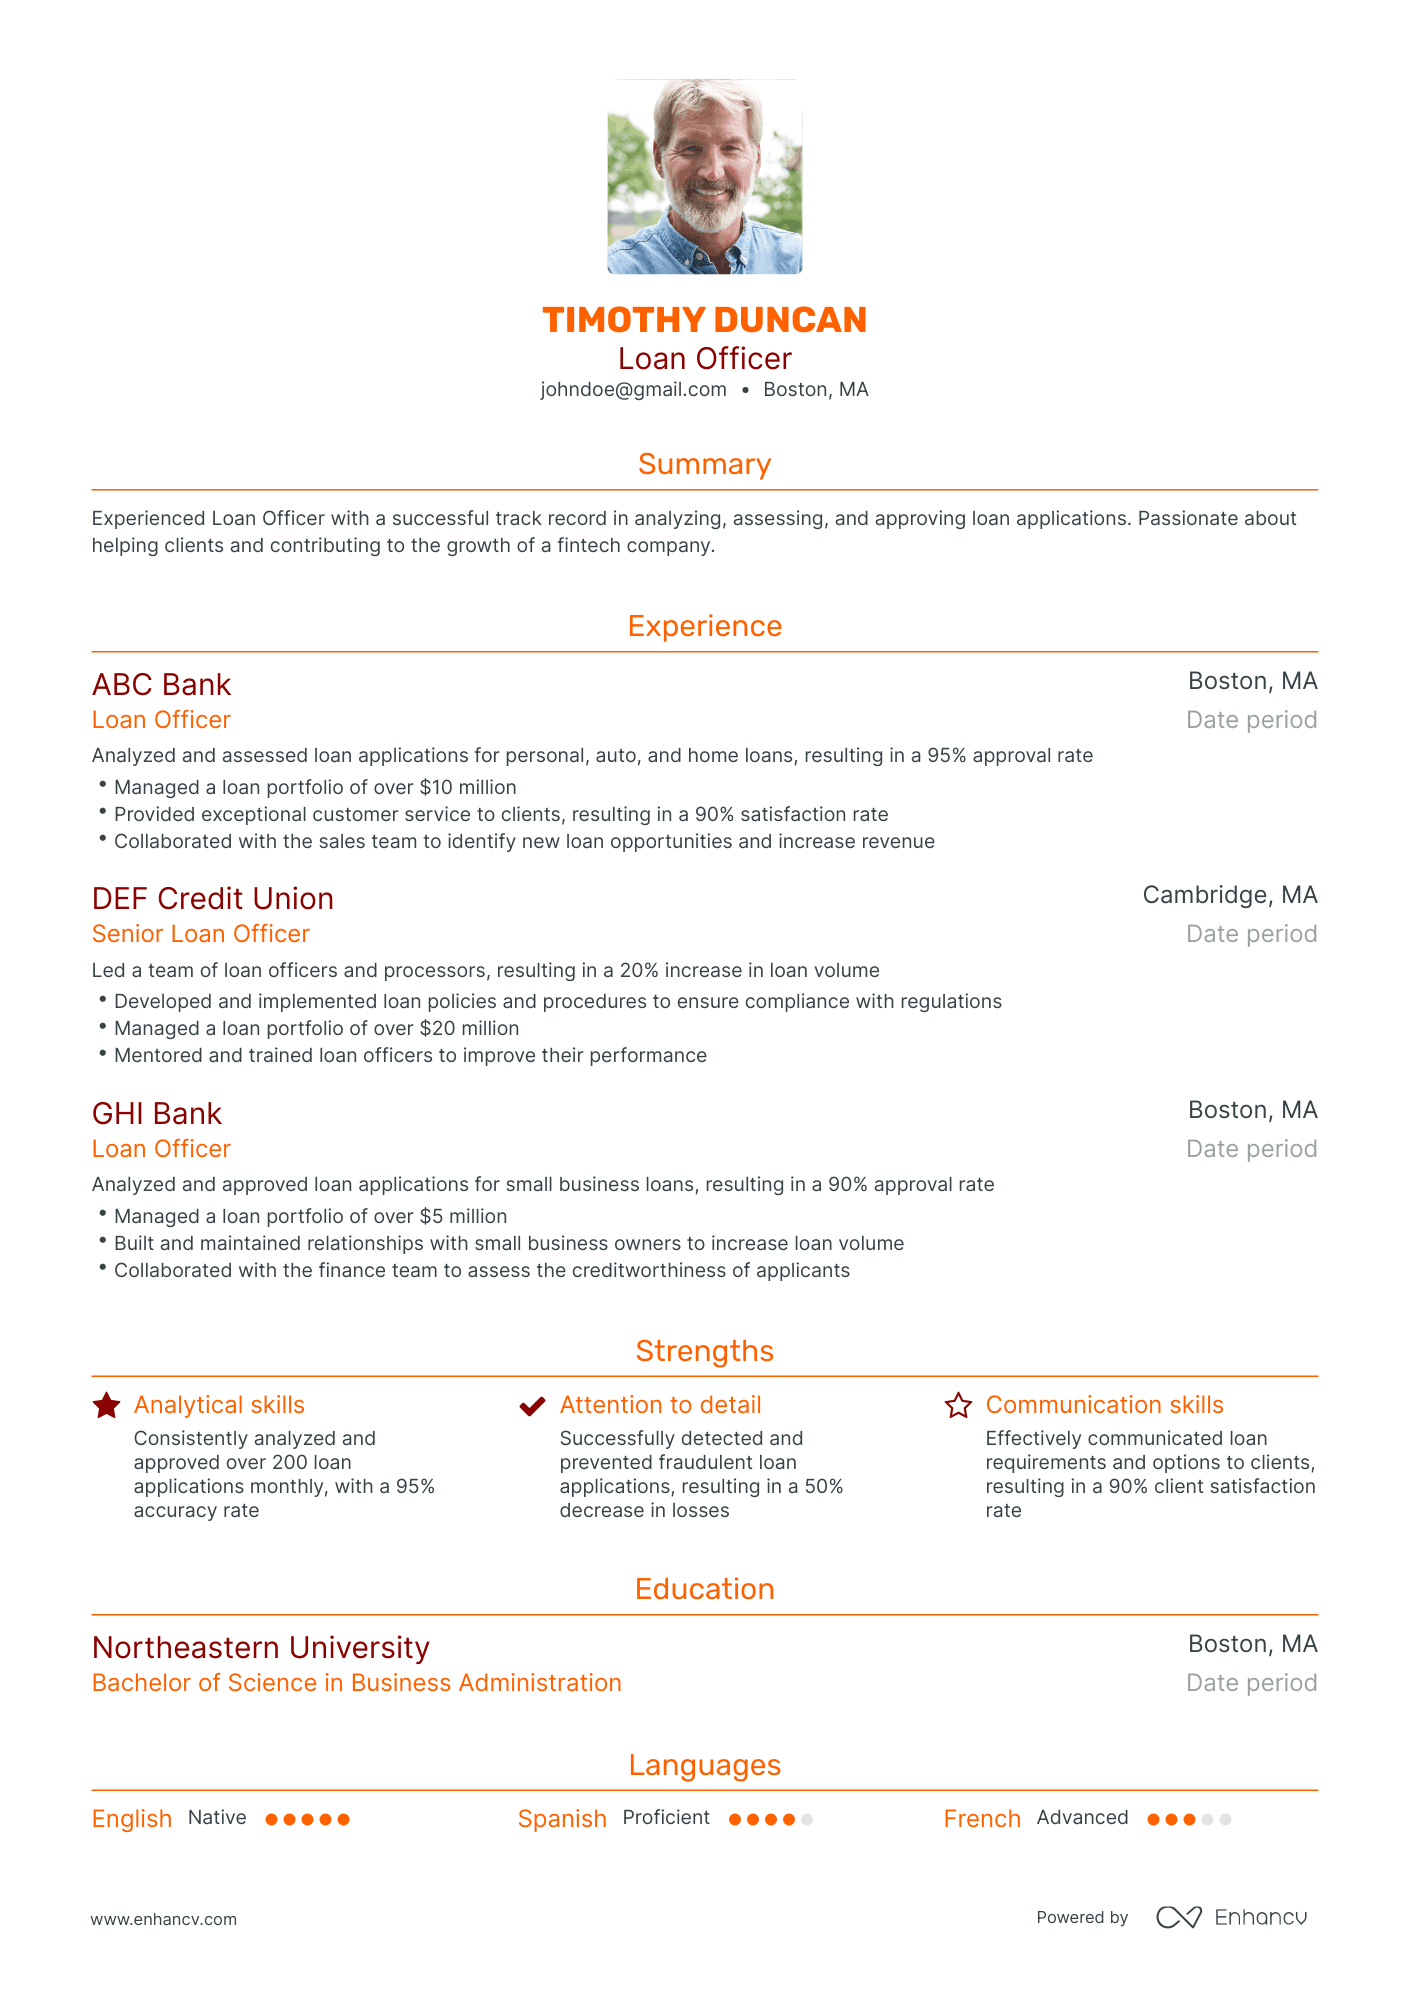 Traditional Loan Officer Resume Template